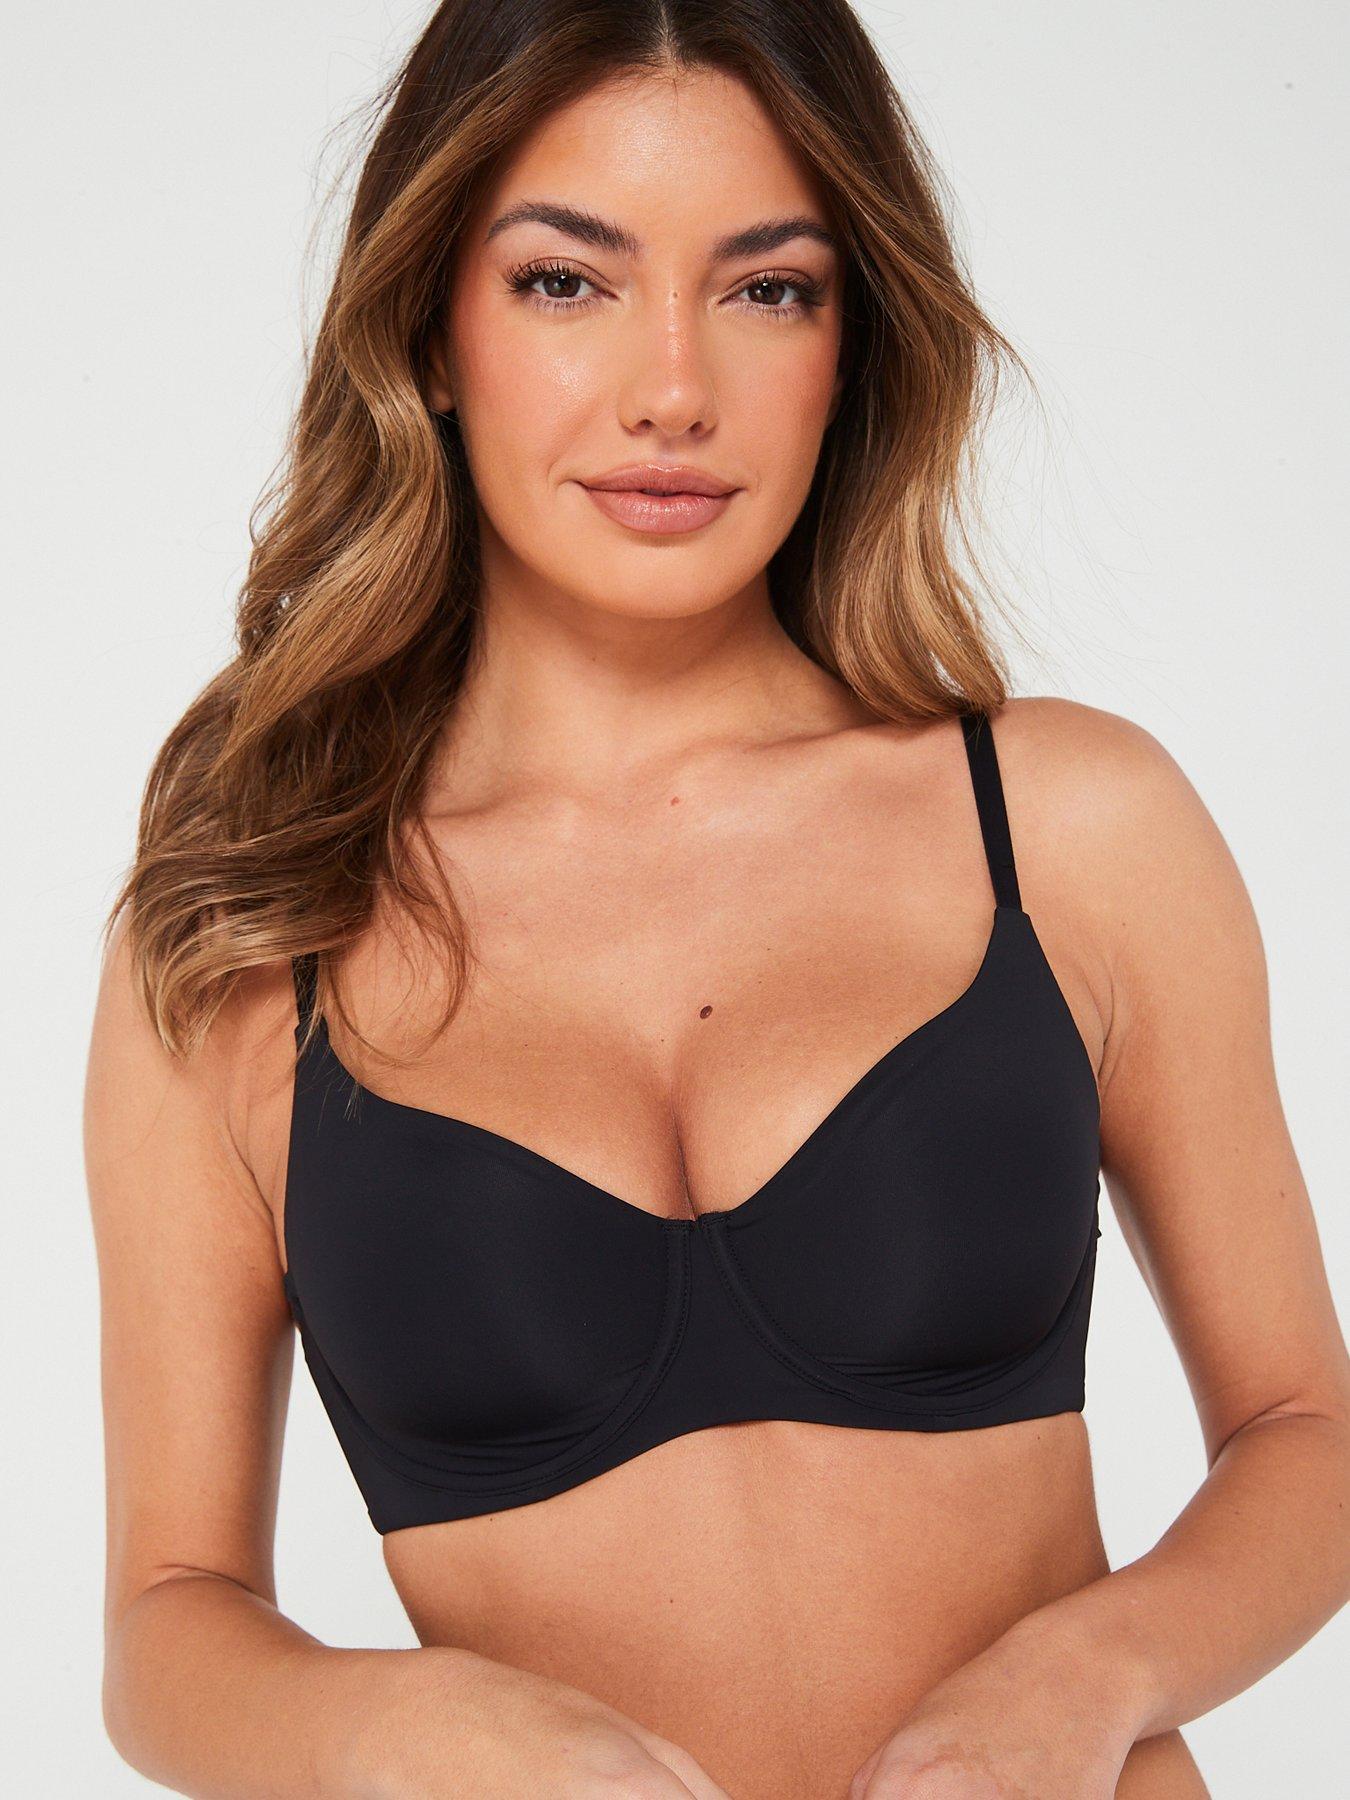 Cotton Soft bra - unpadded and unlined, allowing the skin to breathe for all-day  comfort - Miss Mary